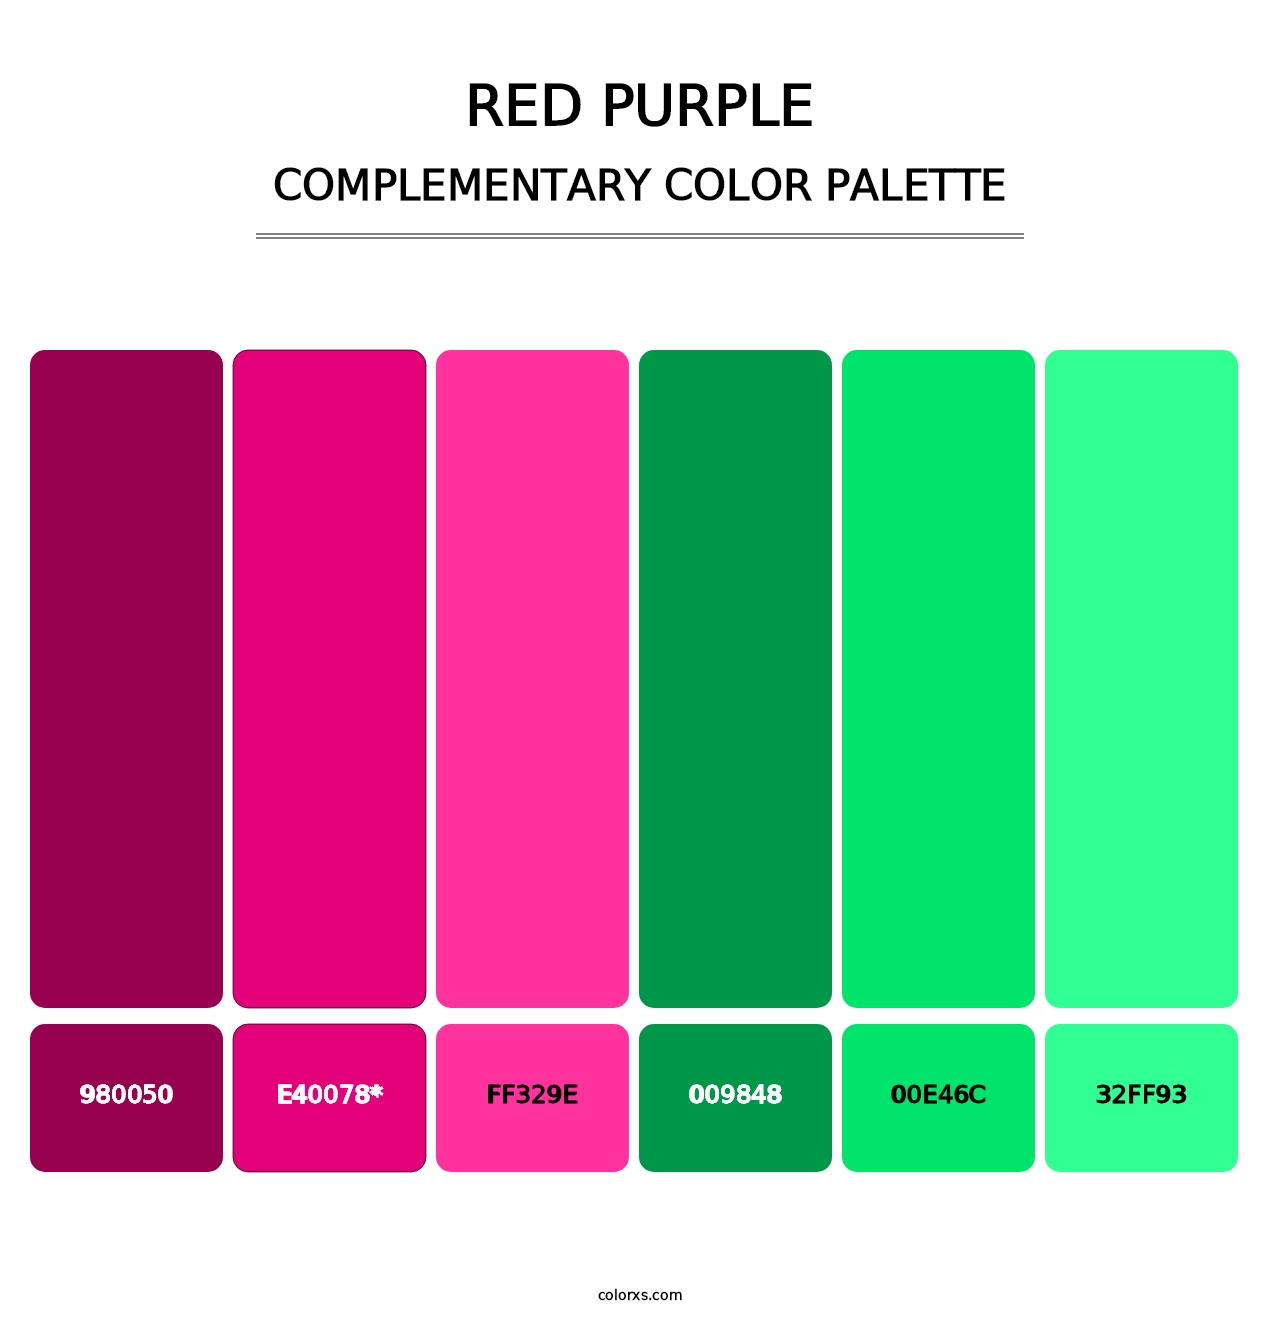 Red Purple - Complementary Color Palette